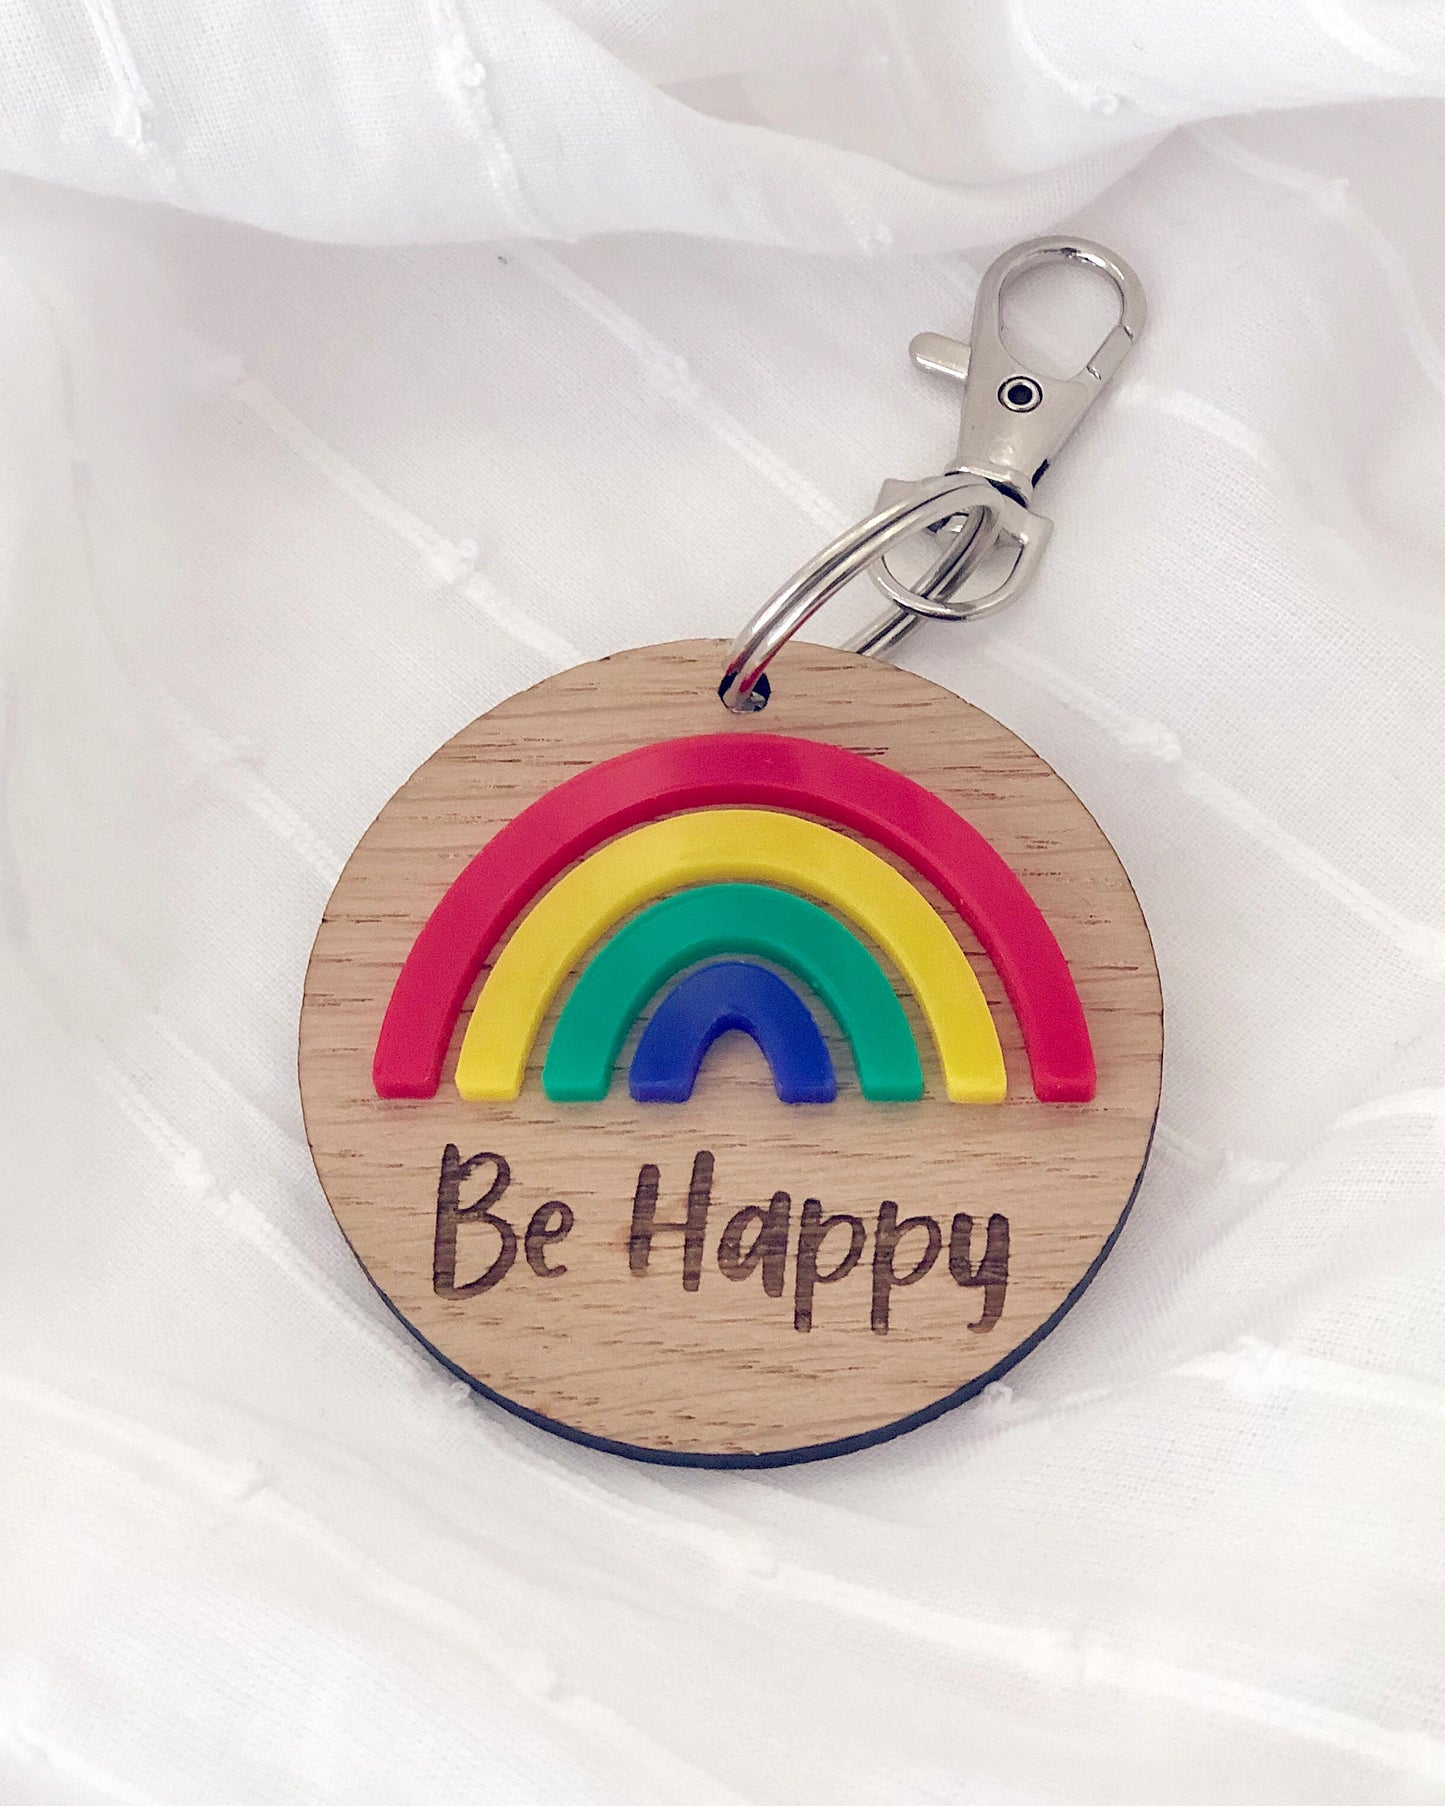 Wooden key ring with colourful rainbow and be happy engraved text